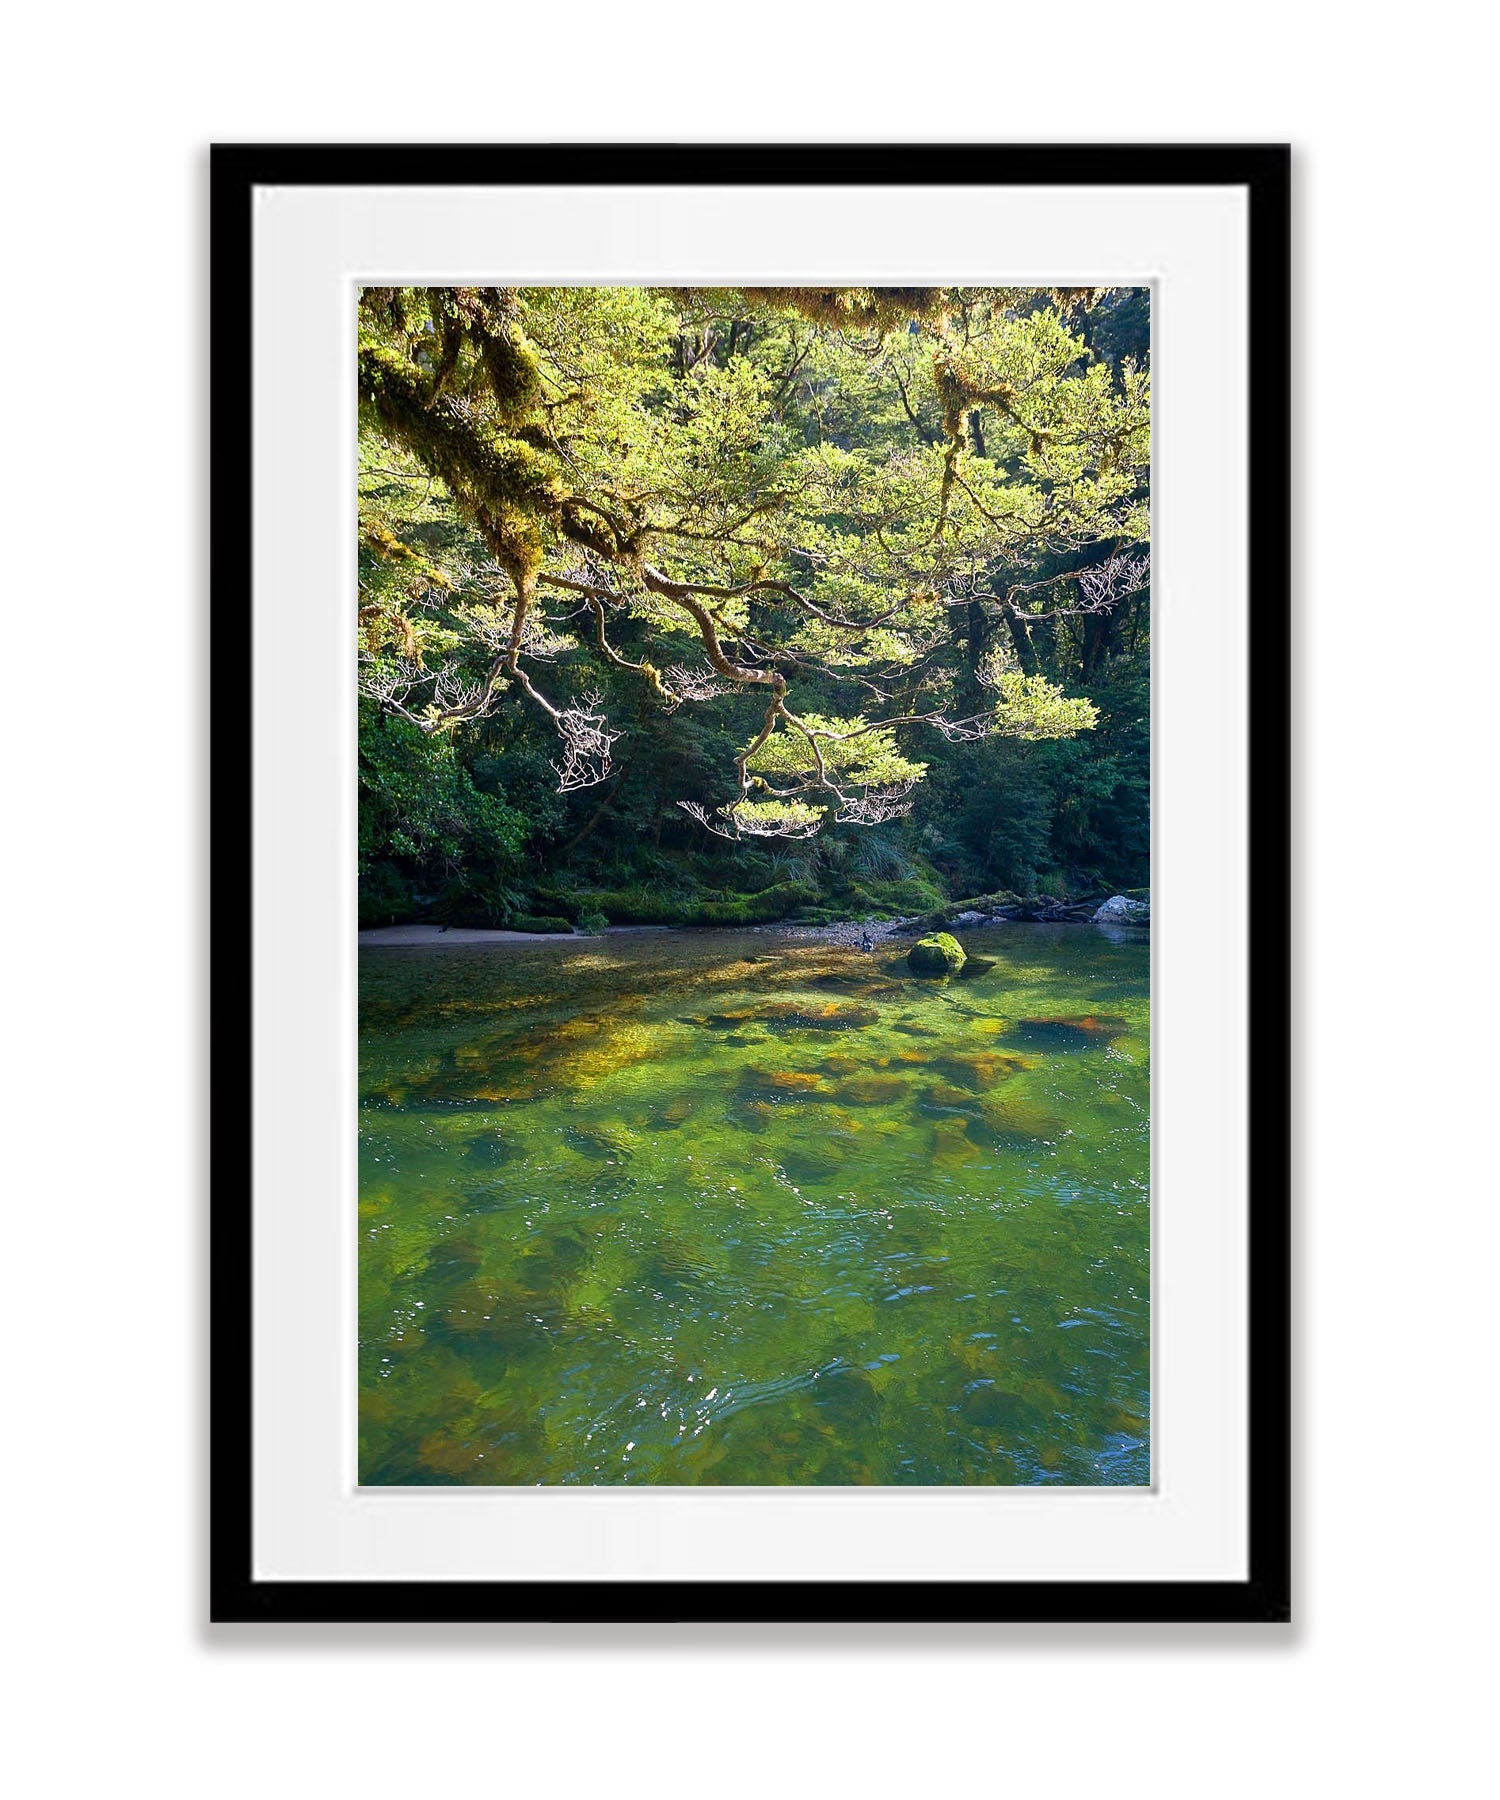 Beech Trees along the Clinton River, Milford Track - New Zealand